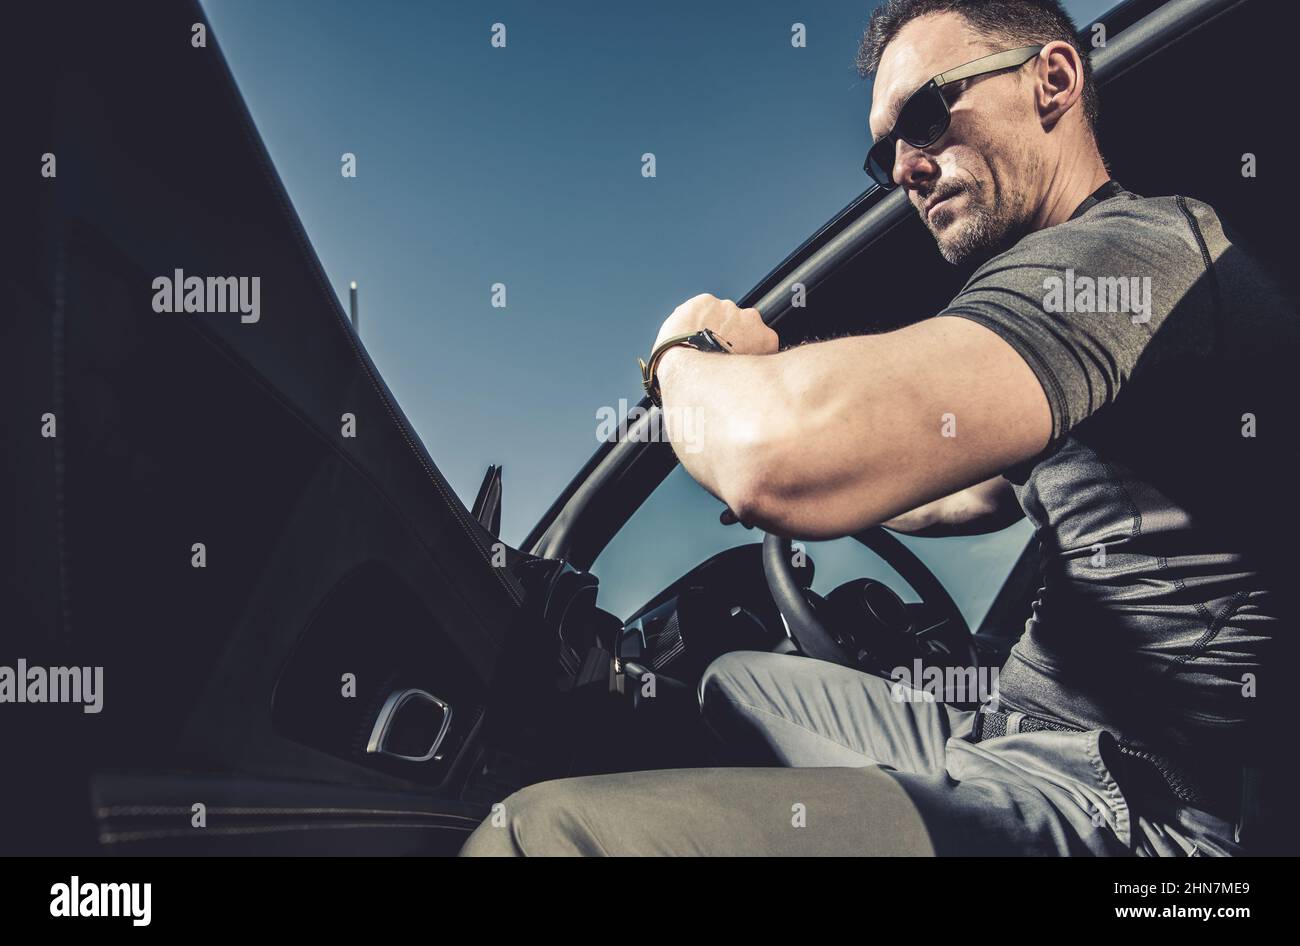 Caucasian Male in His 40s Looking at His Hand Watch While Leaving His Sporty Car. Being on Time Concept. Stock Photo